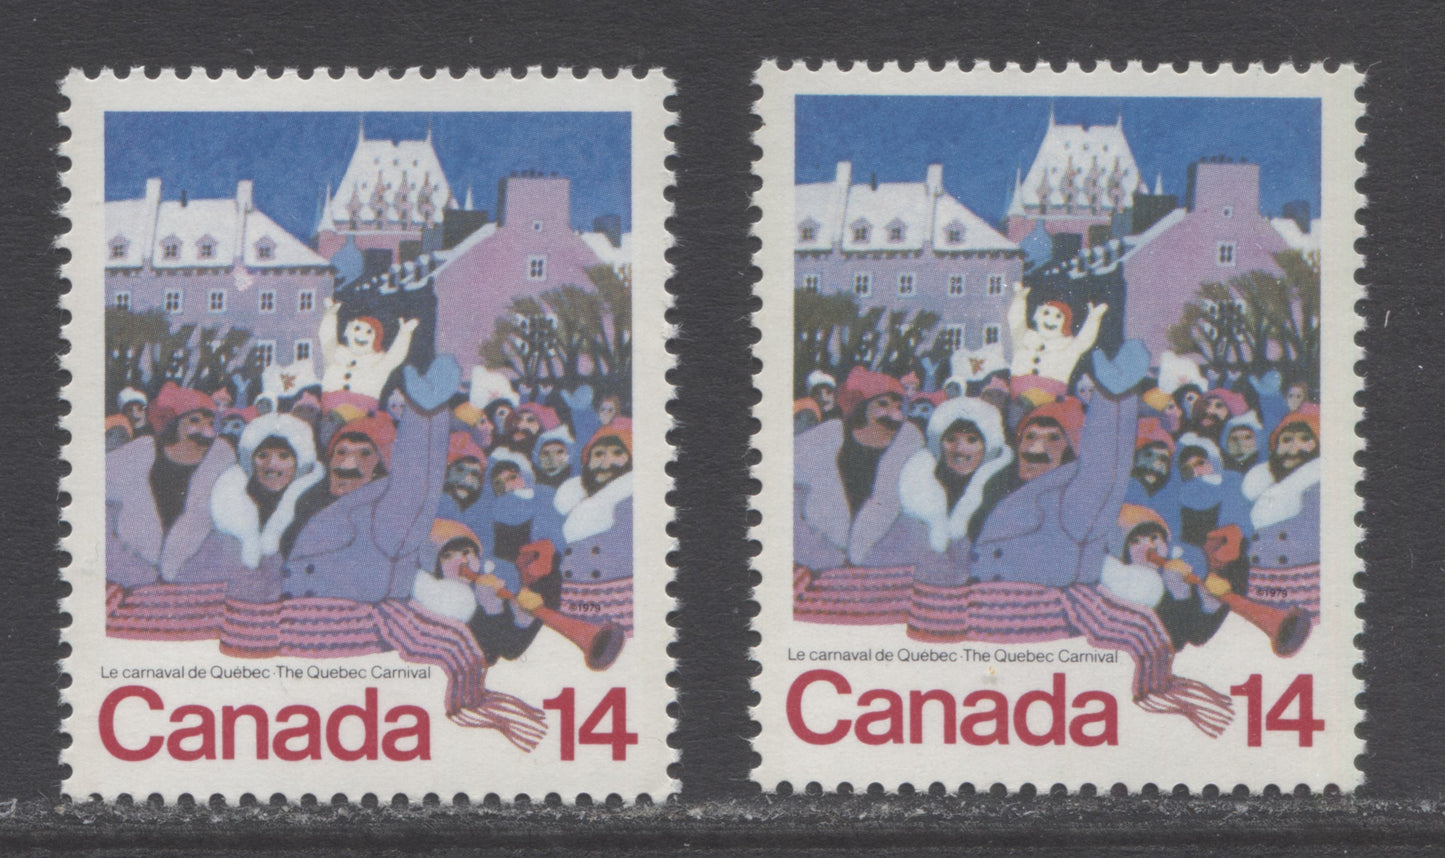 Lot 458 Canada #780var 14c Multicolored Winter Carnival Scene, 1979 Quebec Carnival Issue, 2 VFNH Singles Showing Damaged Brickwark Variety With Normal - Unknown Position, DF1/DF1 Papers